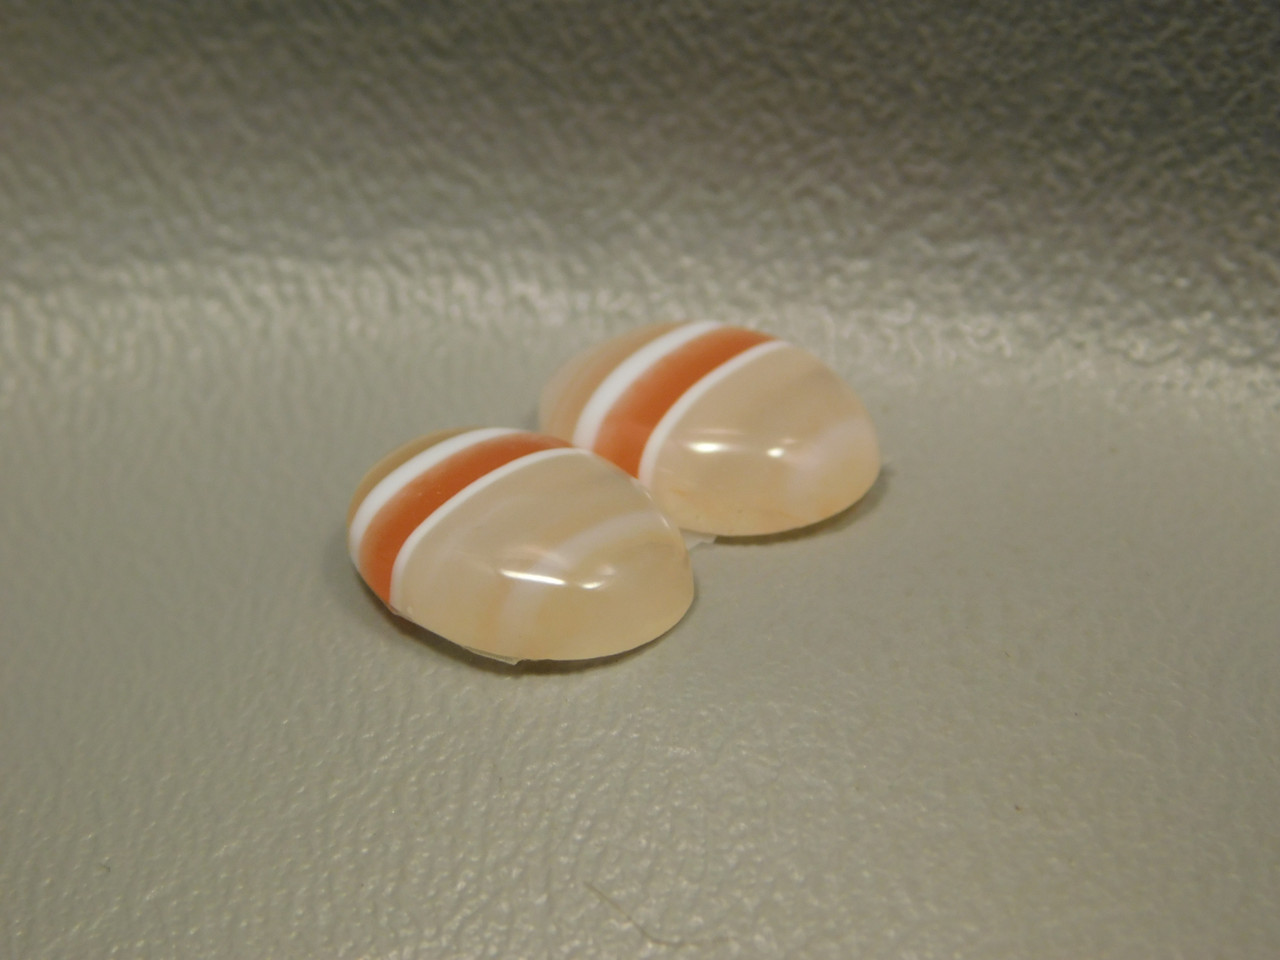 Carnelian Agate Loose Stones Cabochons Banded Matched Pairs #7